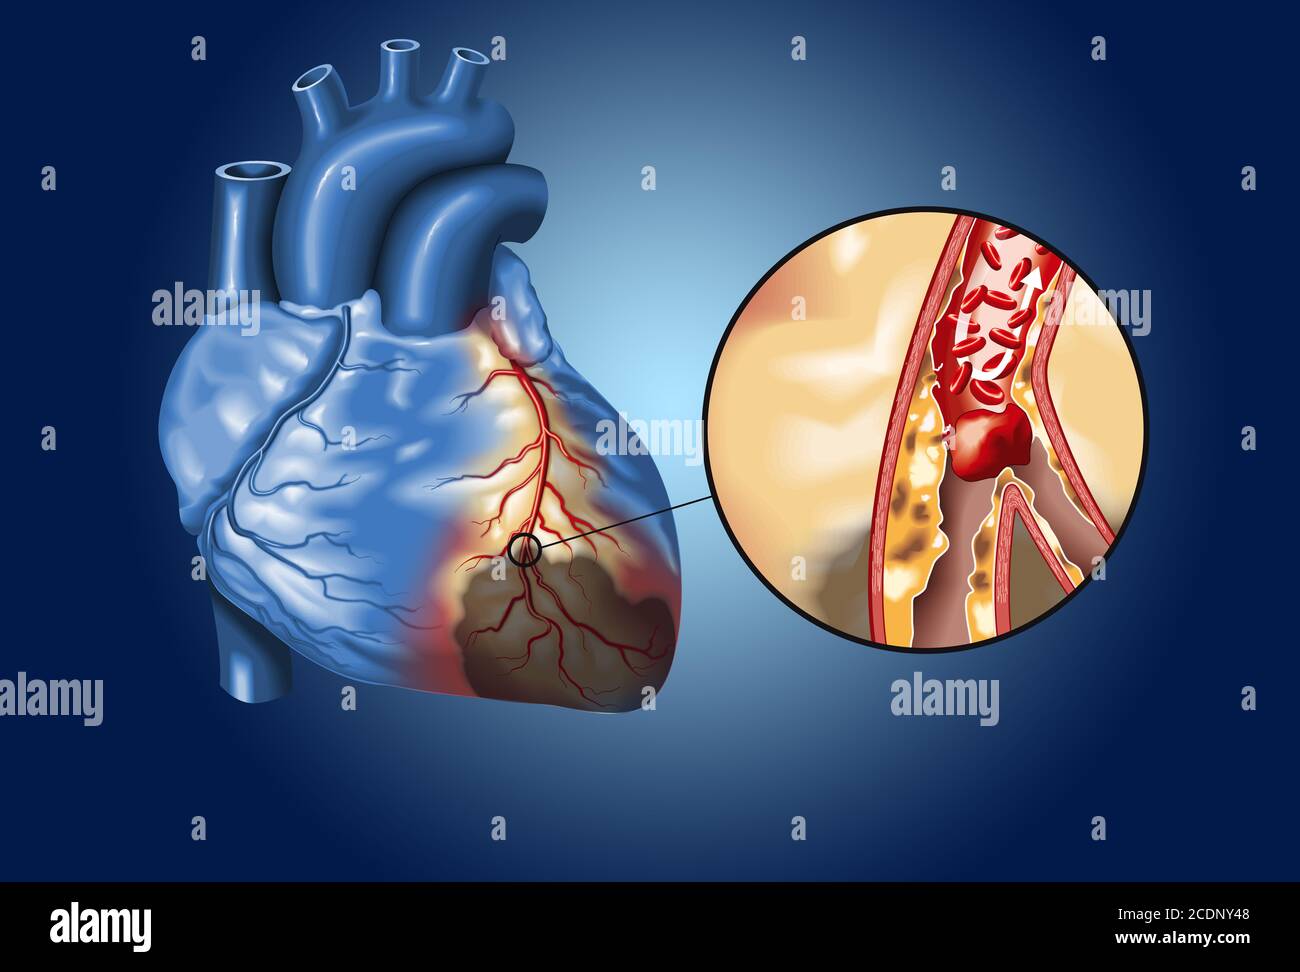 Plaque in coronary artery, blood clot (thrombus) breaking off and blocking blood flow (cardiac infarction) Stock Photo